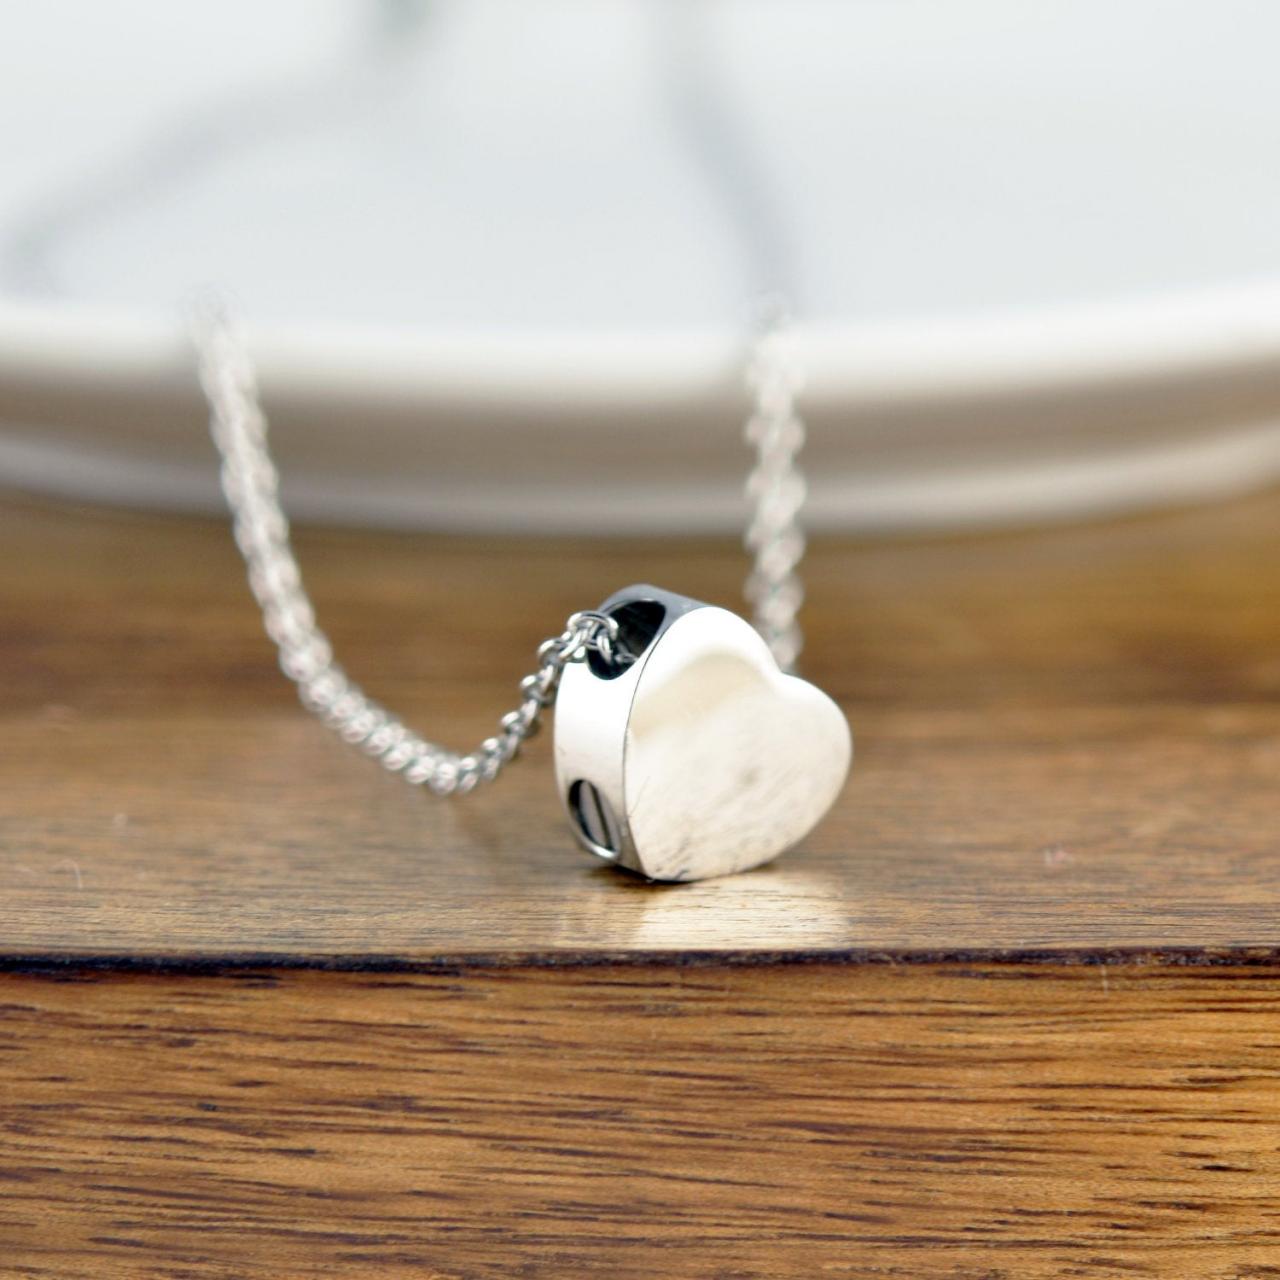 Silver Heart Necklace, Cremation Jewelry, Ash Jewelry, Heart Cremation Pendant, Urn Necklace For Ashes, Cremation Necklace